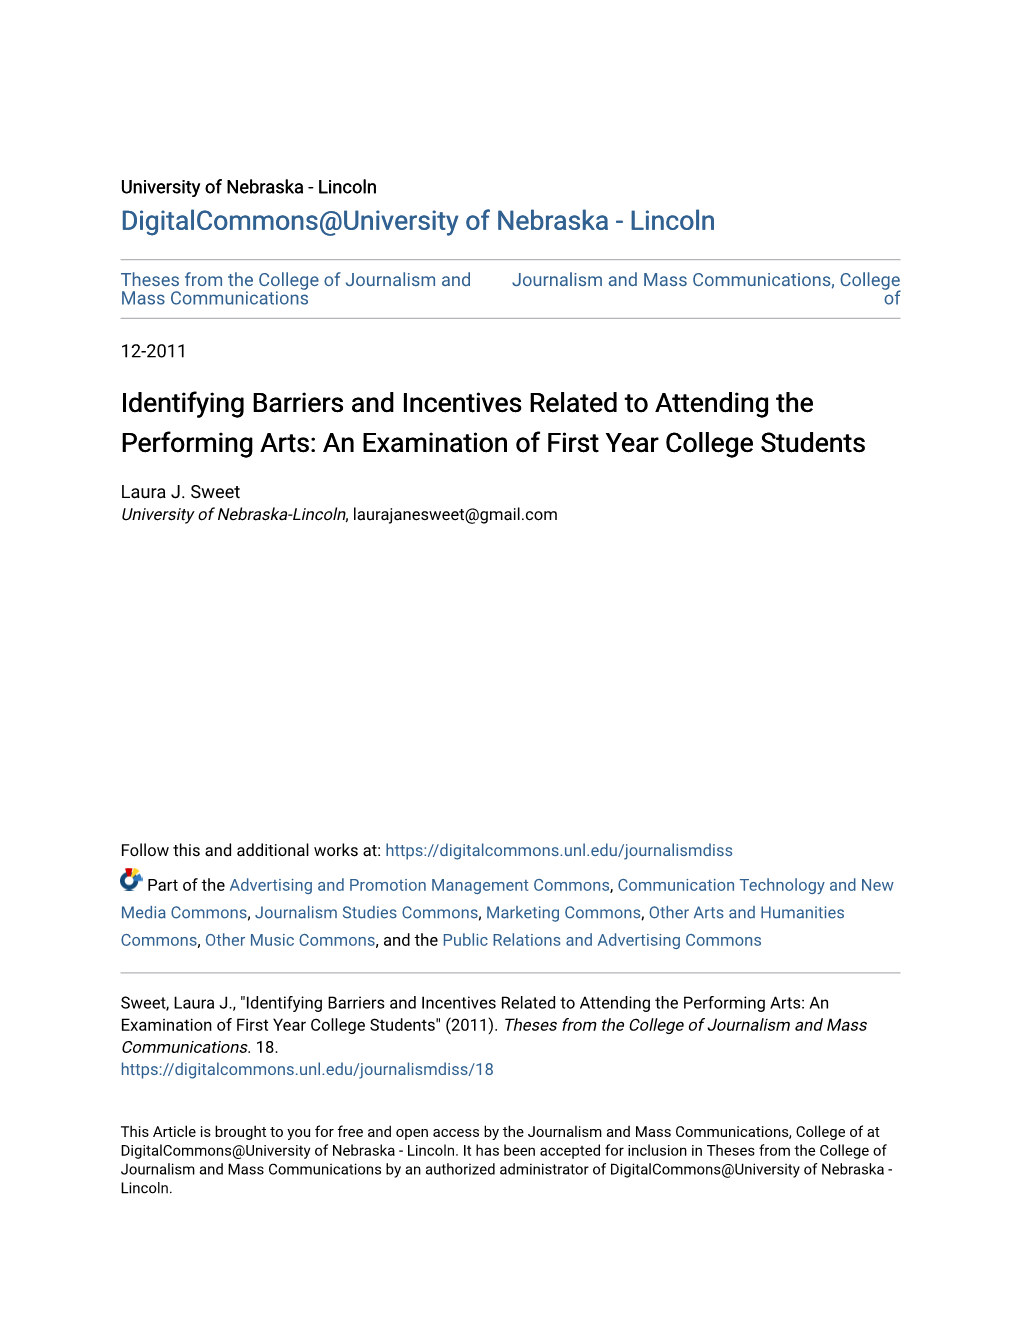 Identifying Barriers and Incentives Related to Attending the Performing Arts: an Examination of First Year College Students